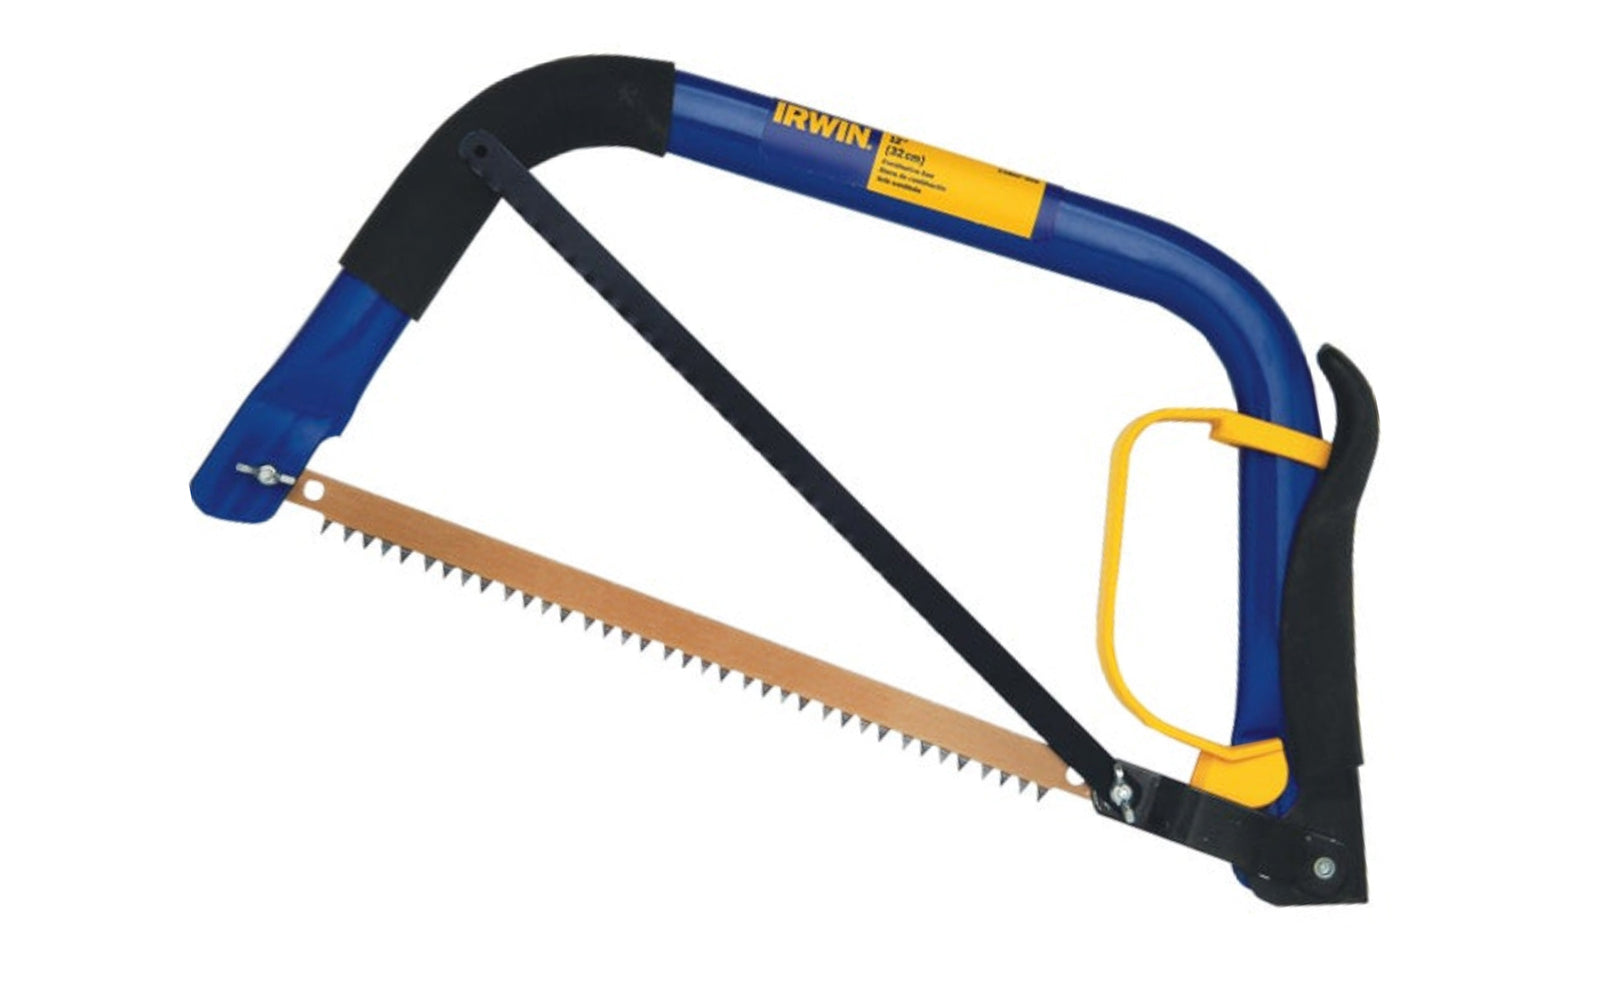 Irwin 12" Hack Saw / Bow Saw. 2 saws in 1 features a hack saw for cutting metal and plastic, or a bow saw for wood and general yard work. Comes with 12" hacksaw blade & 12" bow saw blade. Built-in hand guard & blade guard for safety. 6" throat makes cutting plastic pipe & small trees easy. 